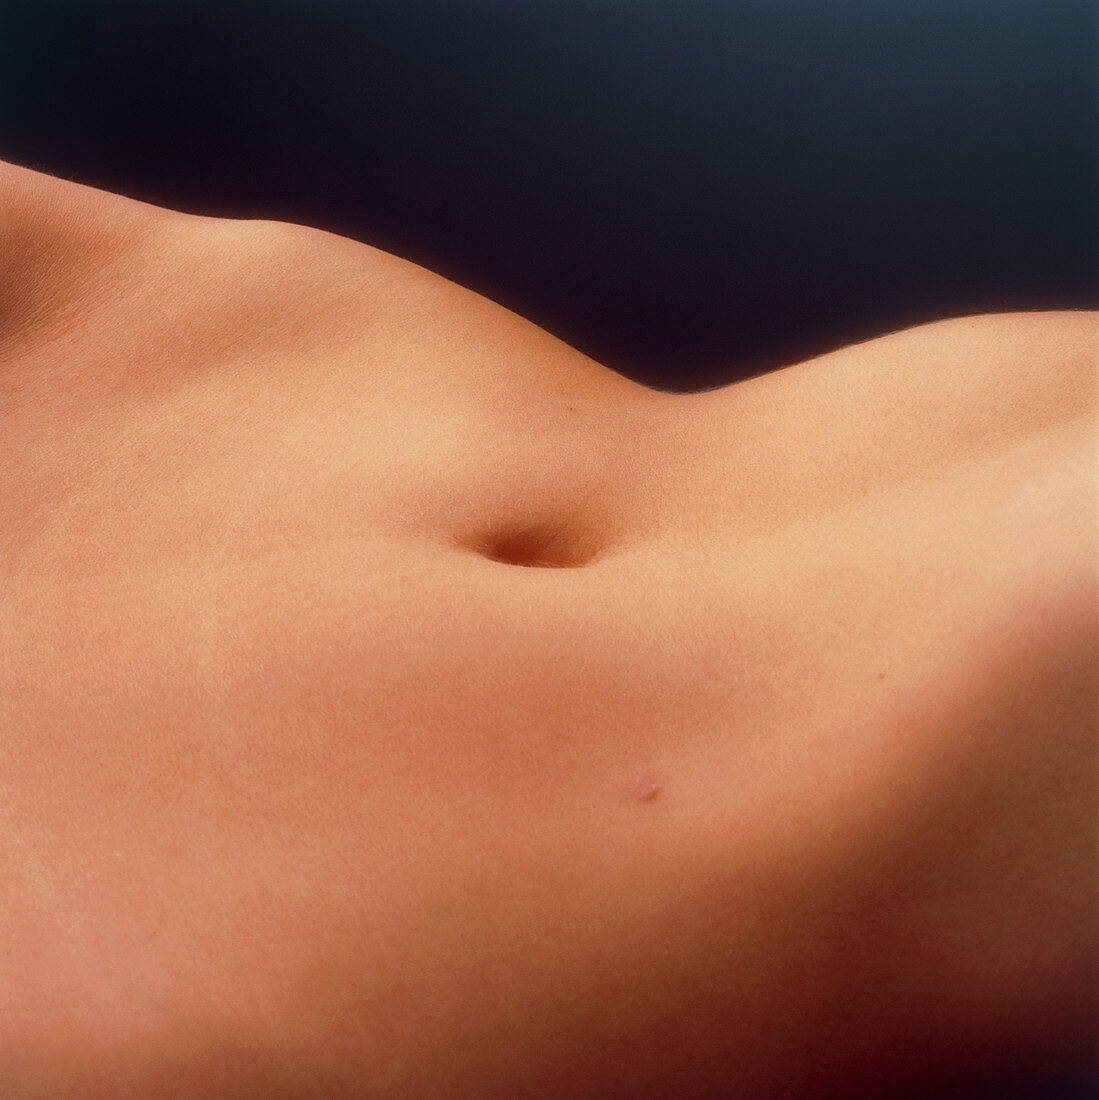 View of the abdomen of a woman lying down